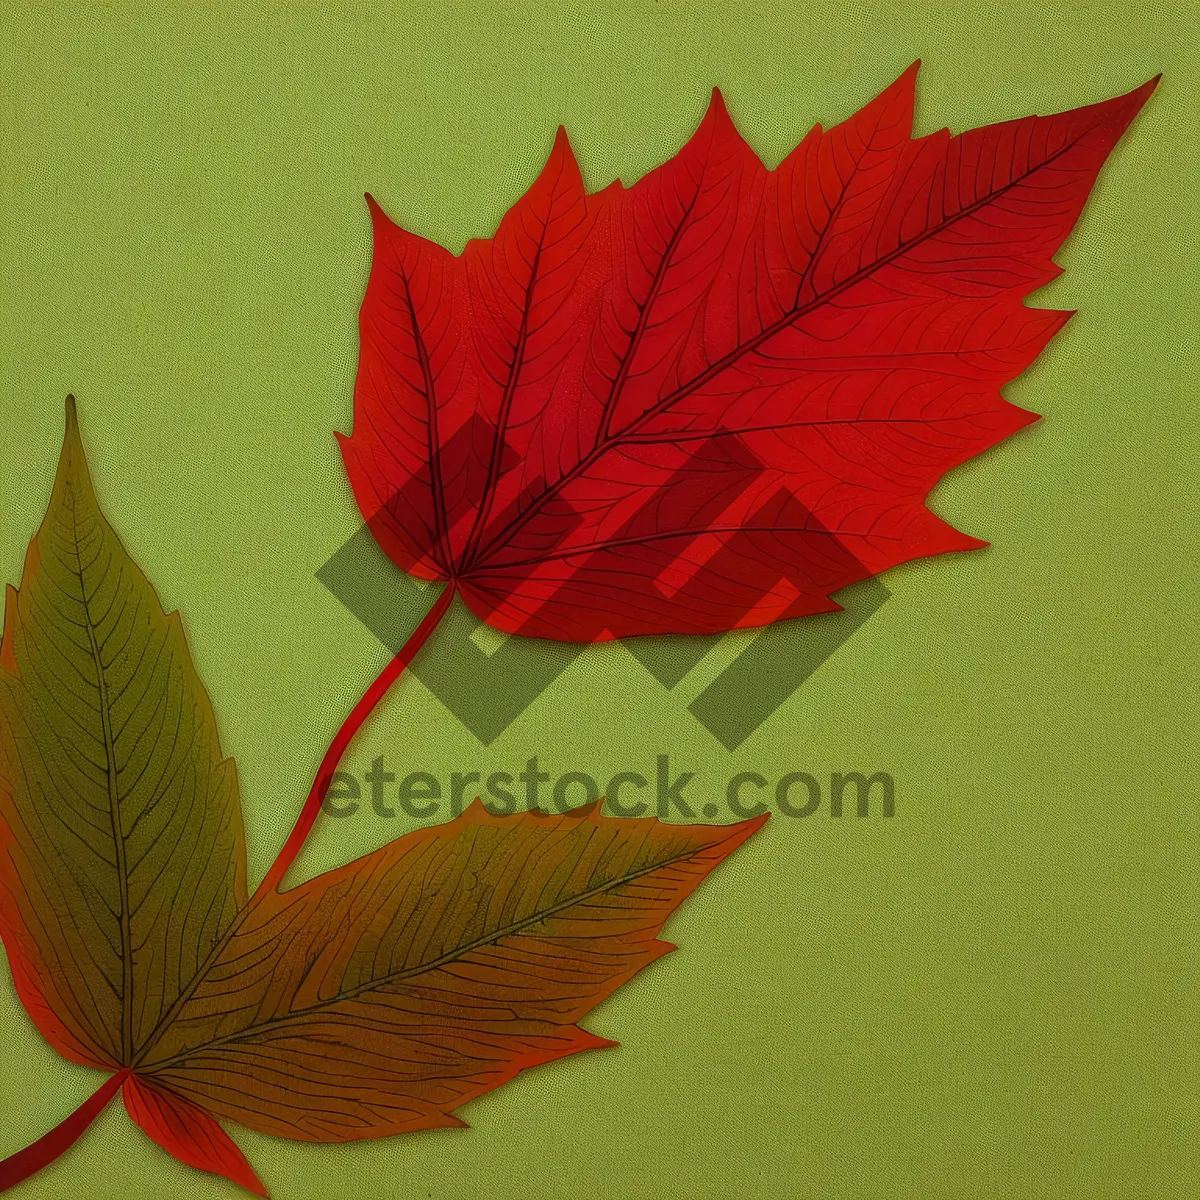 Picture of Vibrant Autumn Maple Leaf Pattern